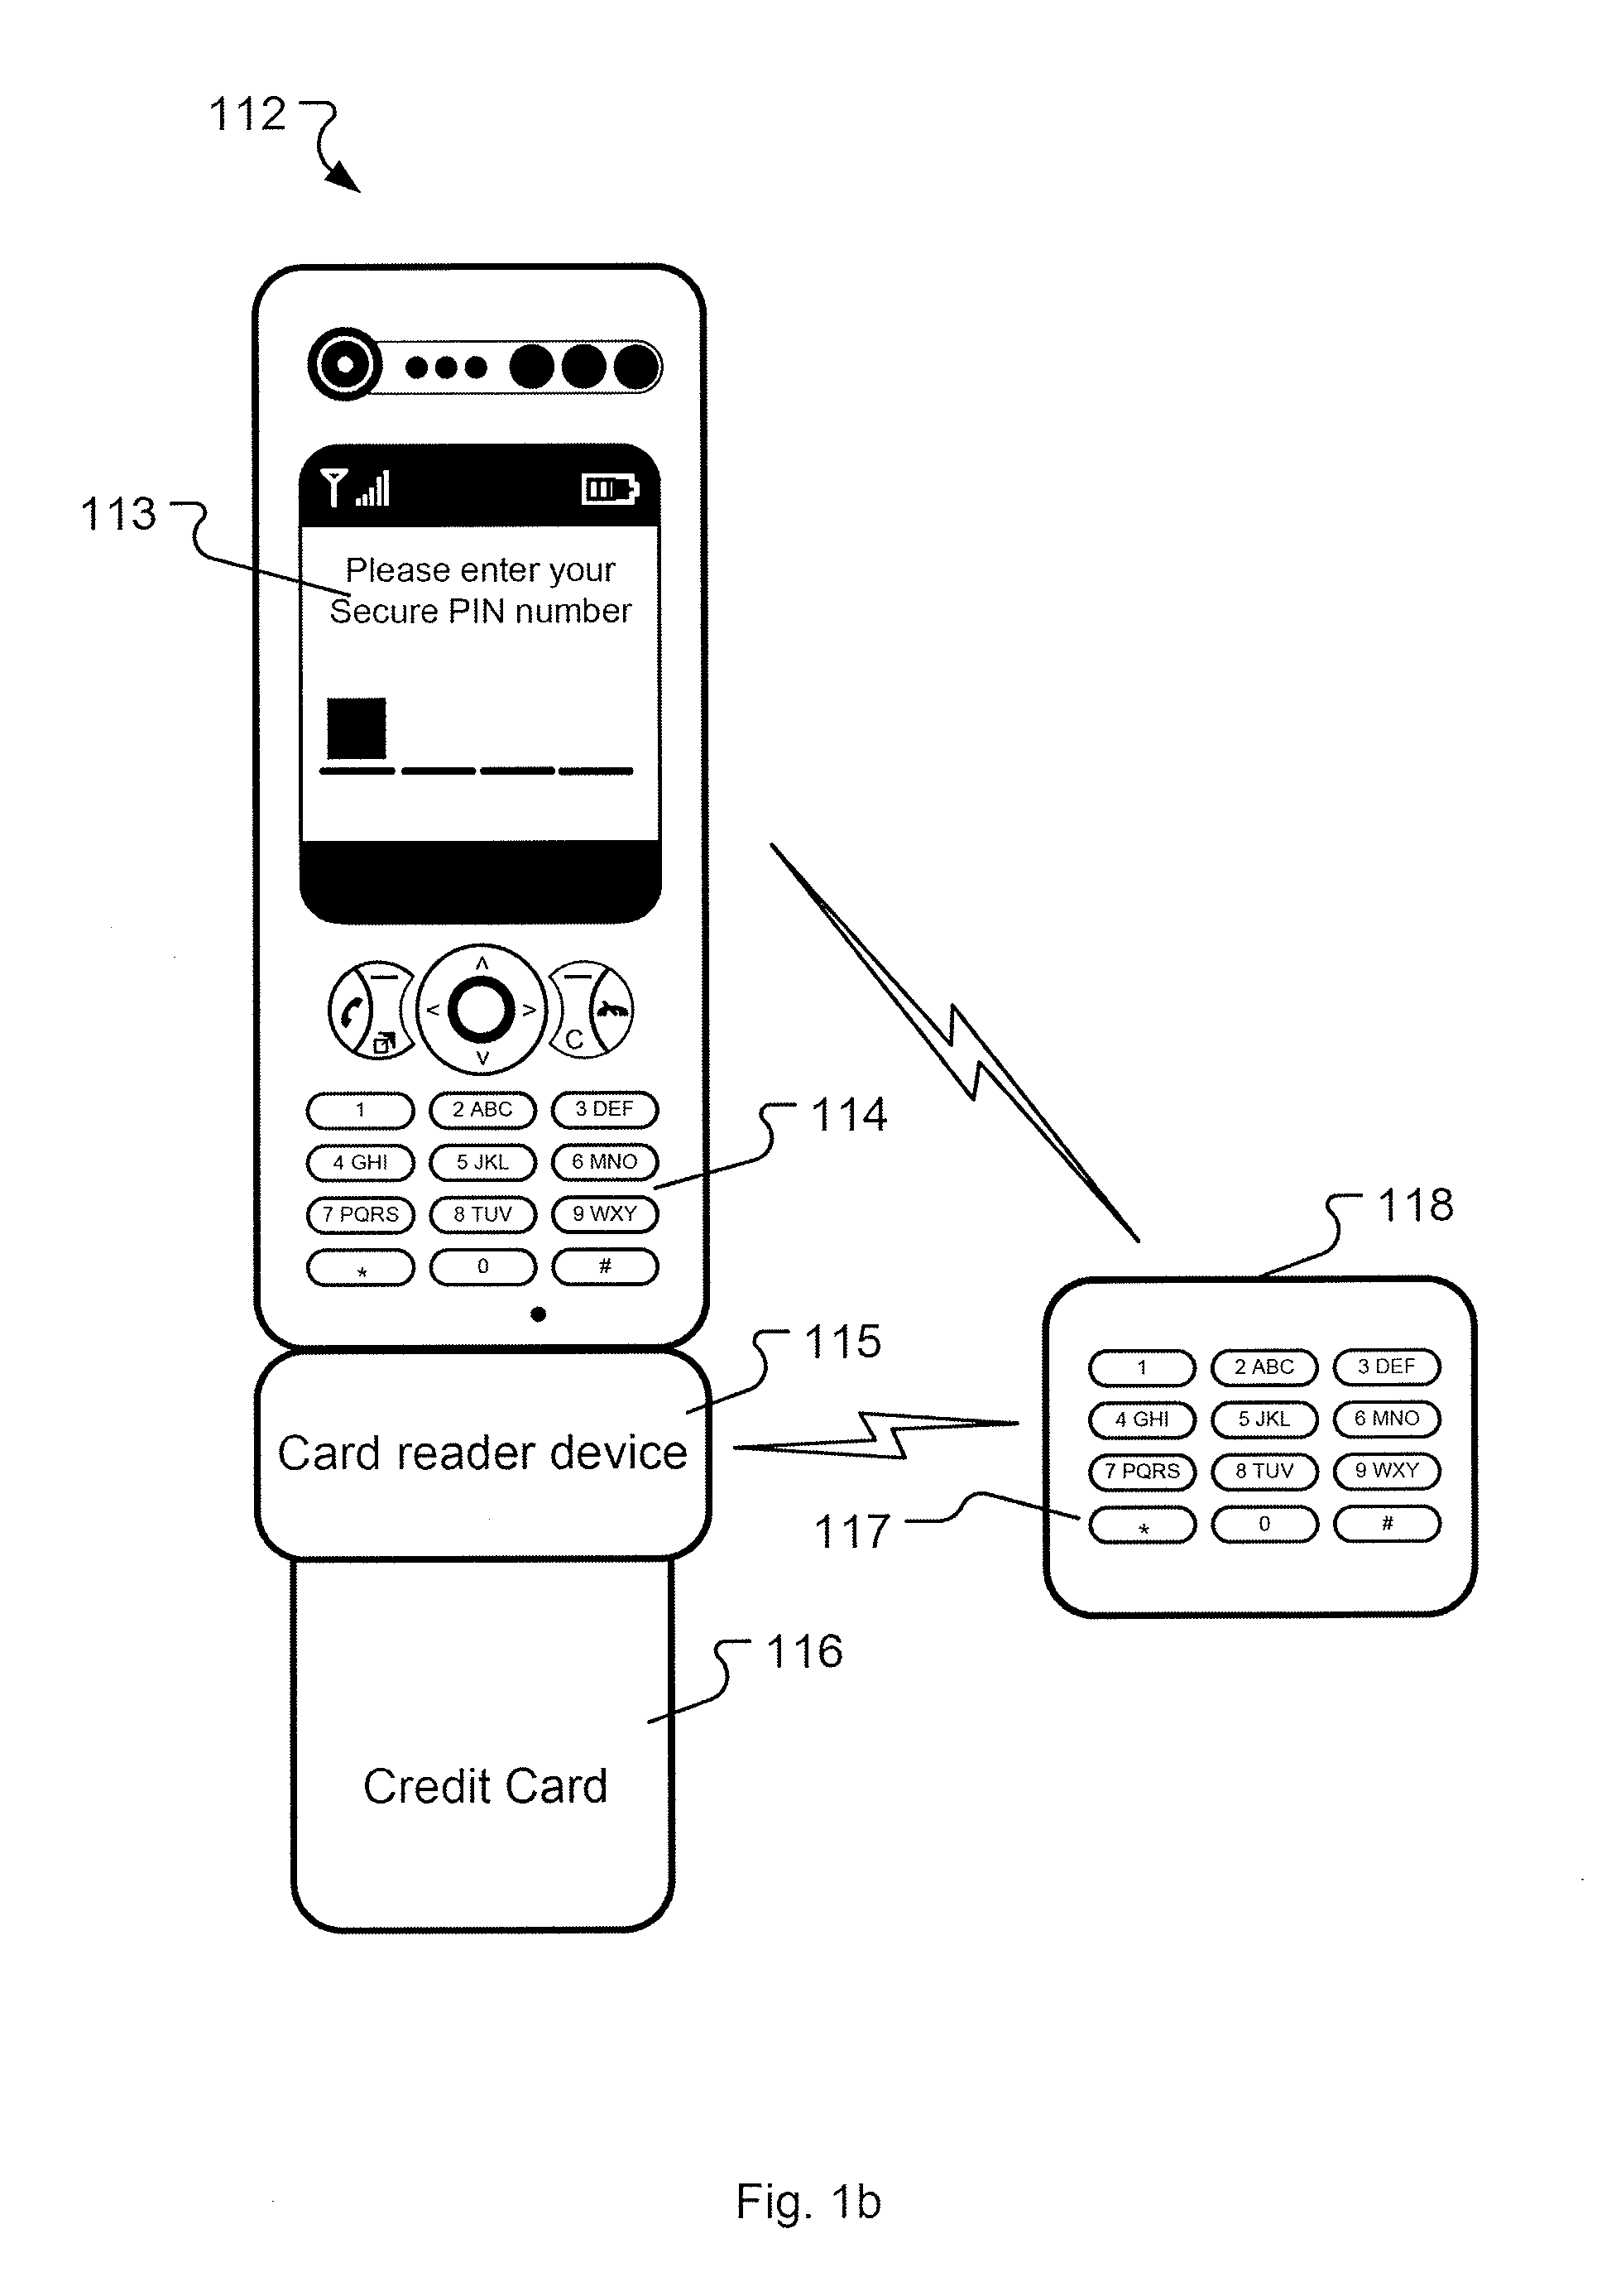 Stand-alone secure pin entry device for enabling emv card transactions with separate card reader